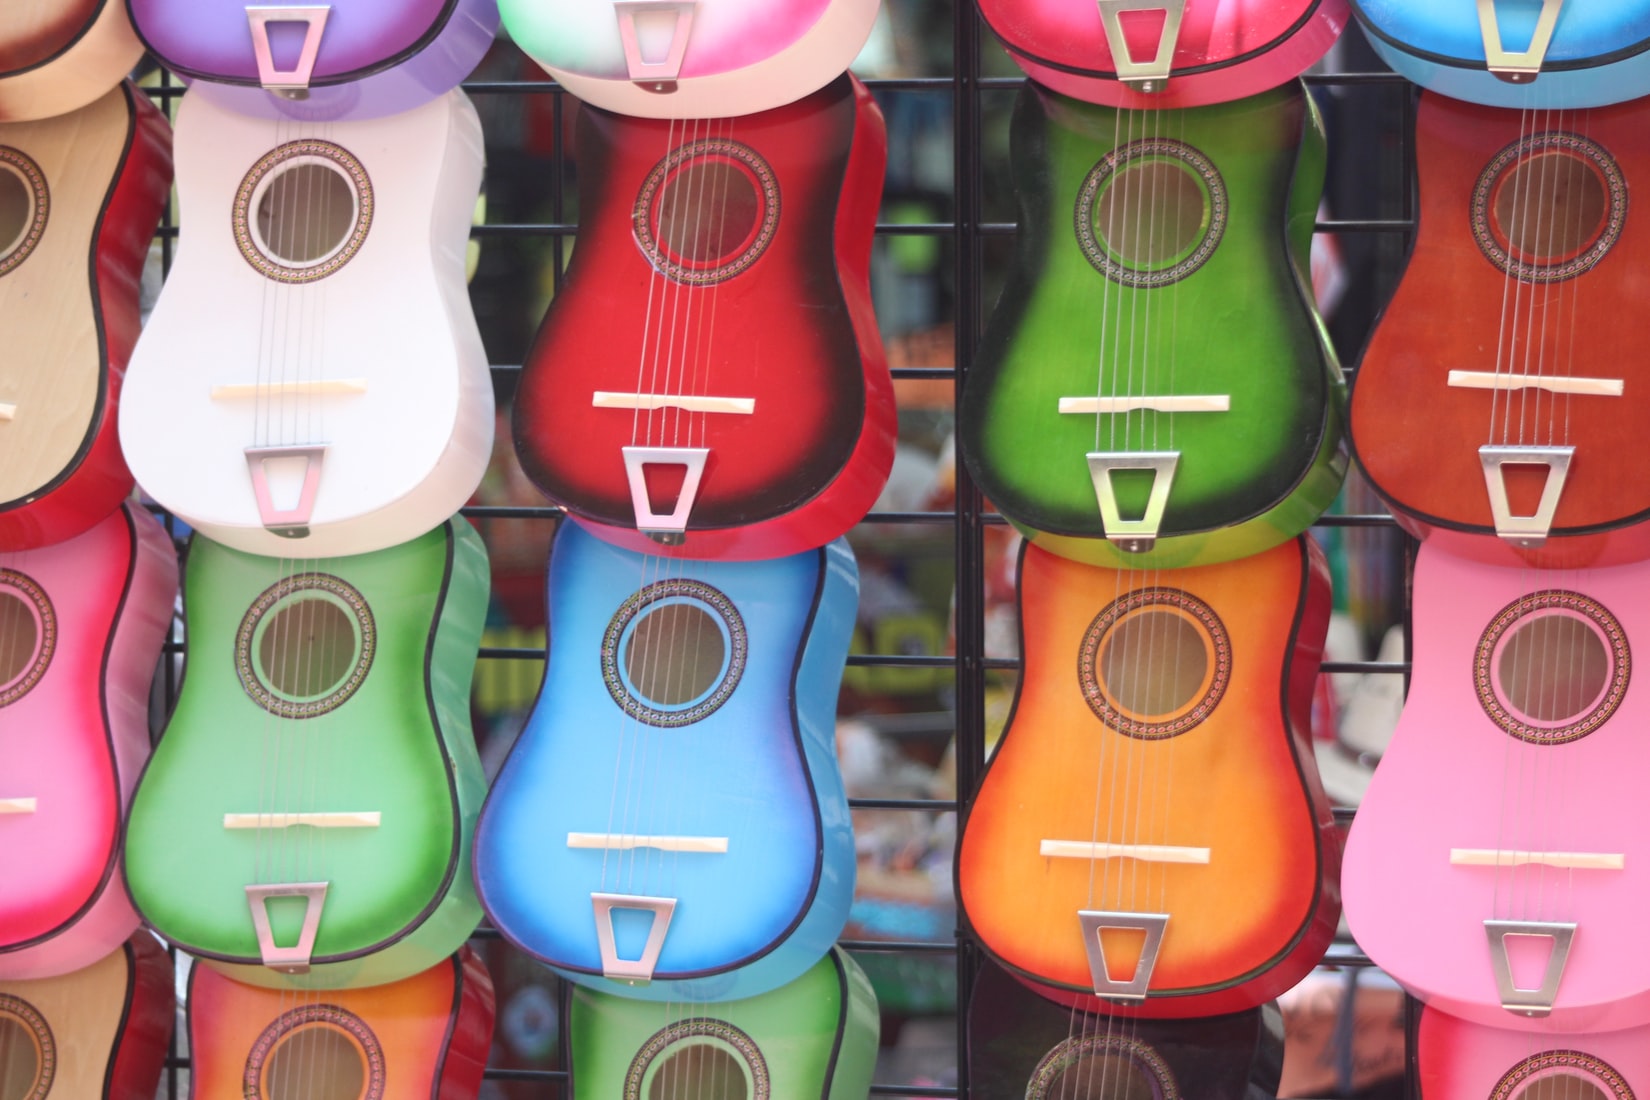 Top 10 Ukuleles for Beginners – Helping You Make The Right Choice